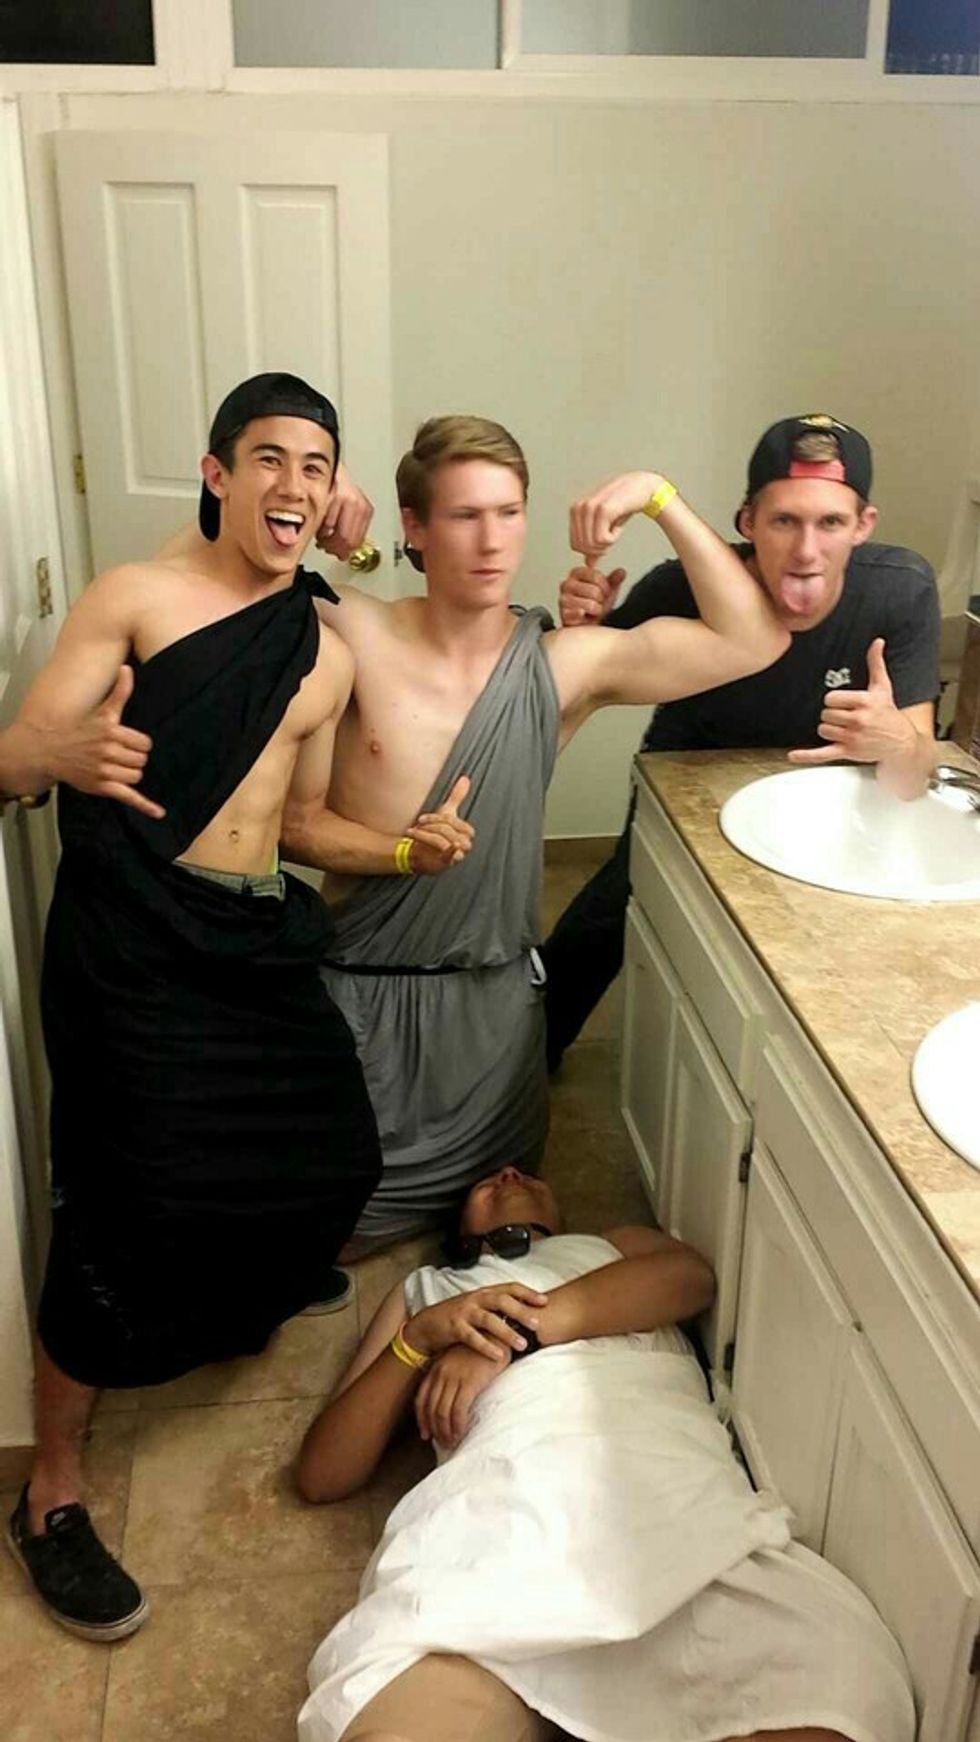 8 Things You Do at Frat Parties That You Probably Shouldn't Do